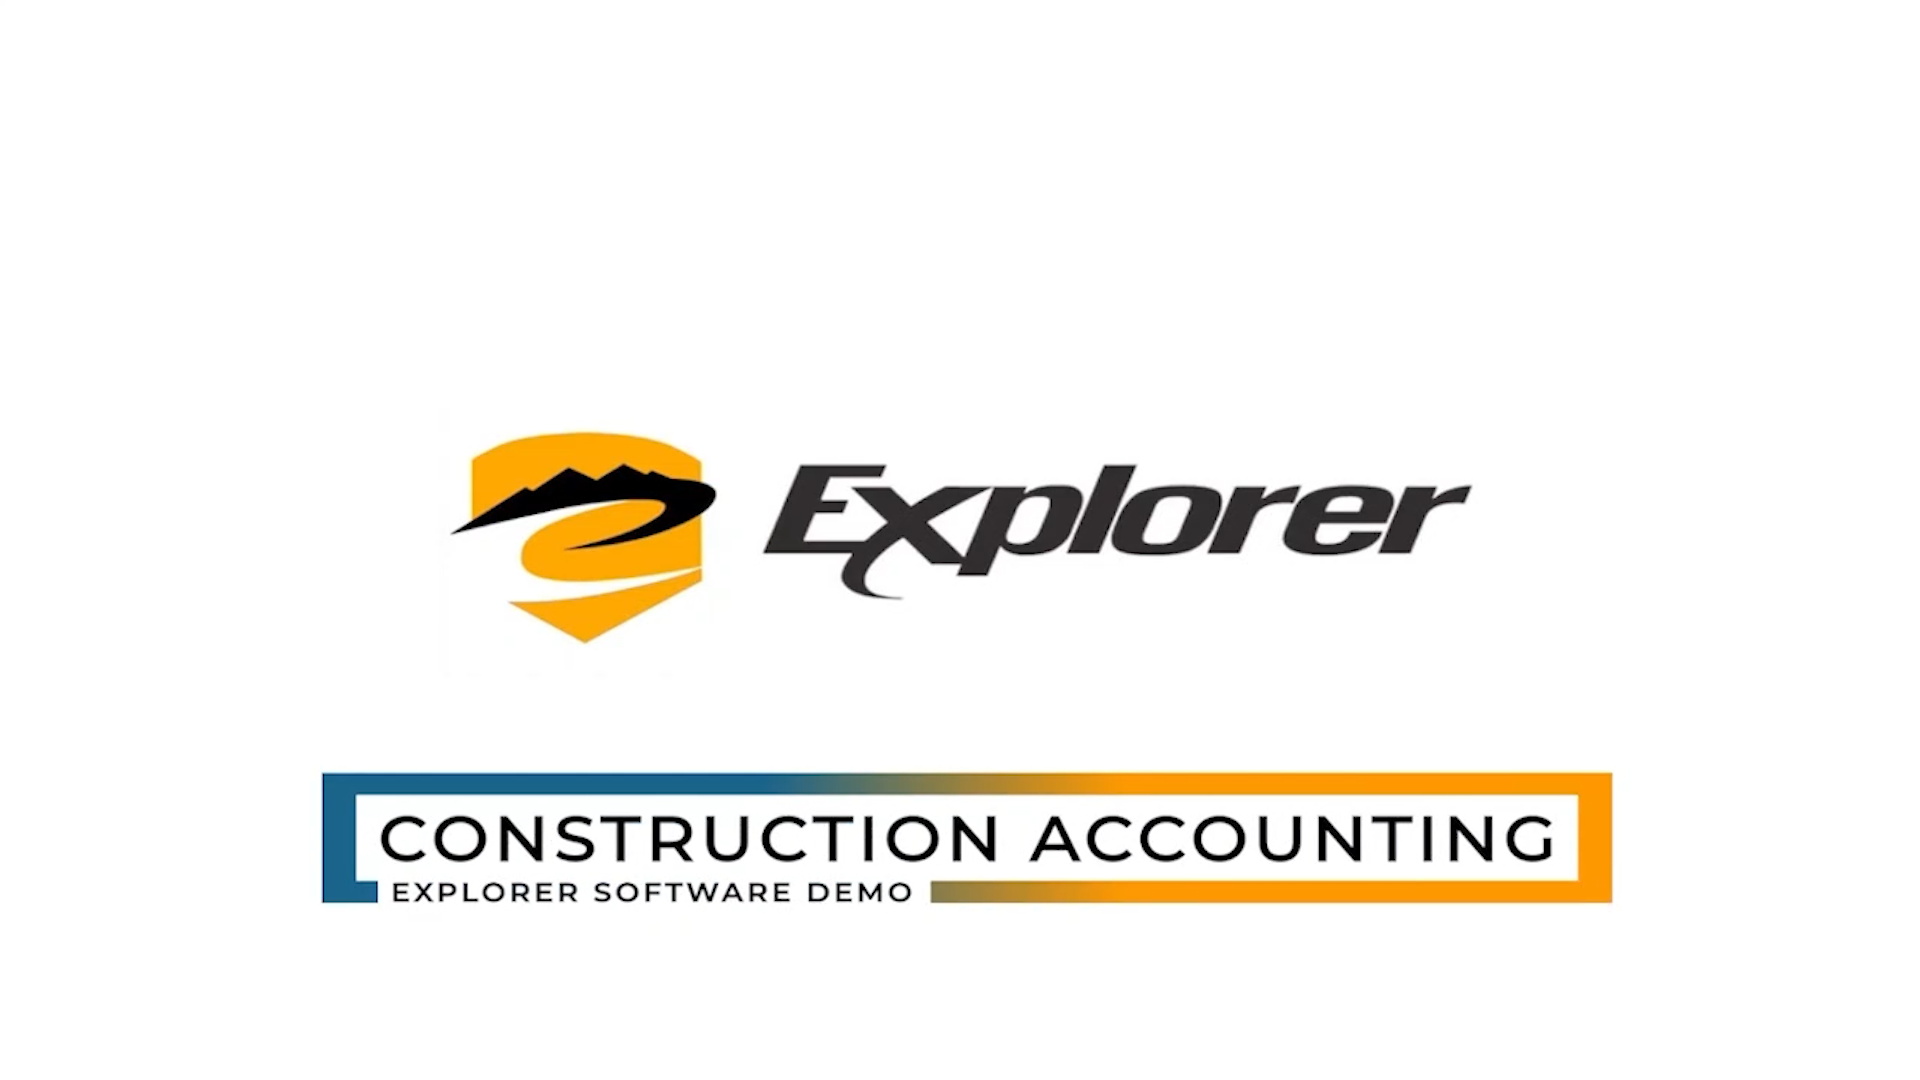 Screenshot for Construction Accounting Demo Video